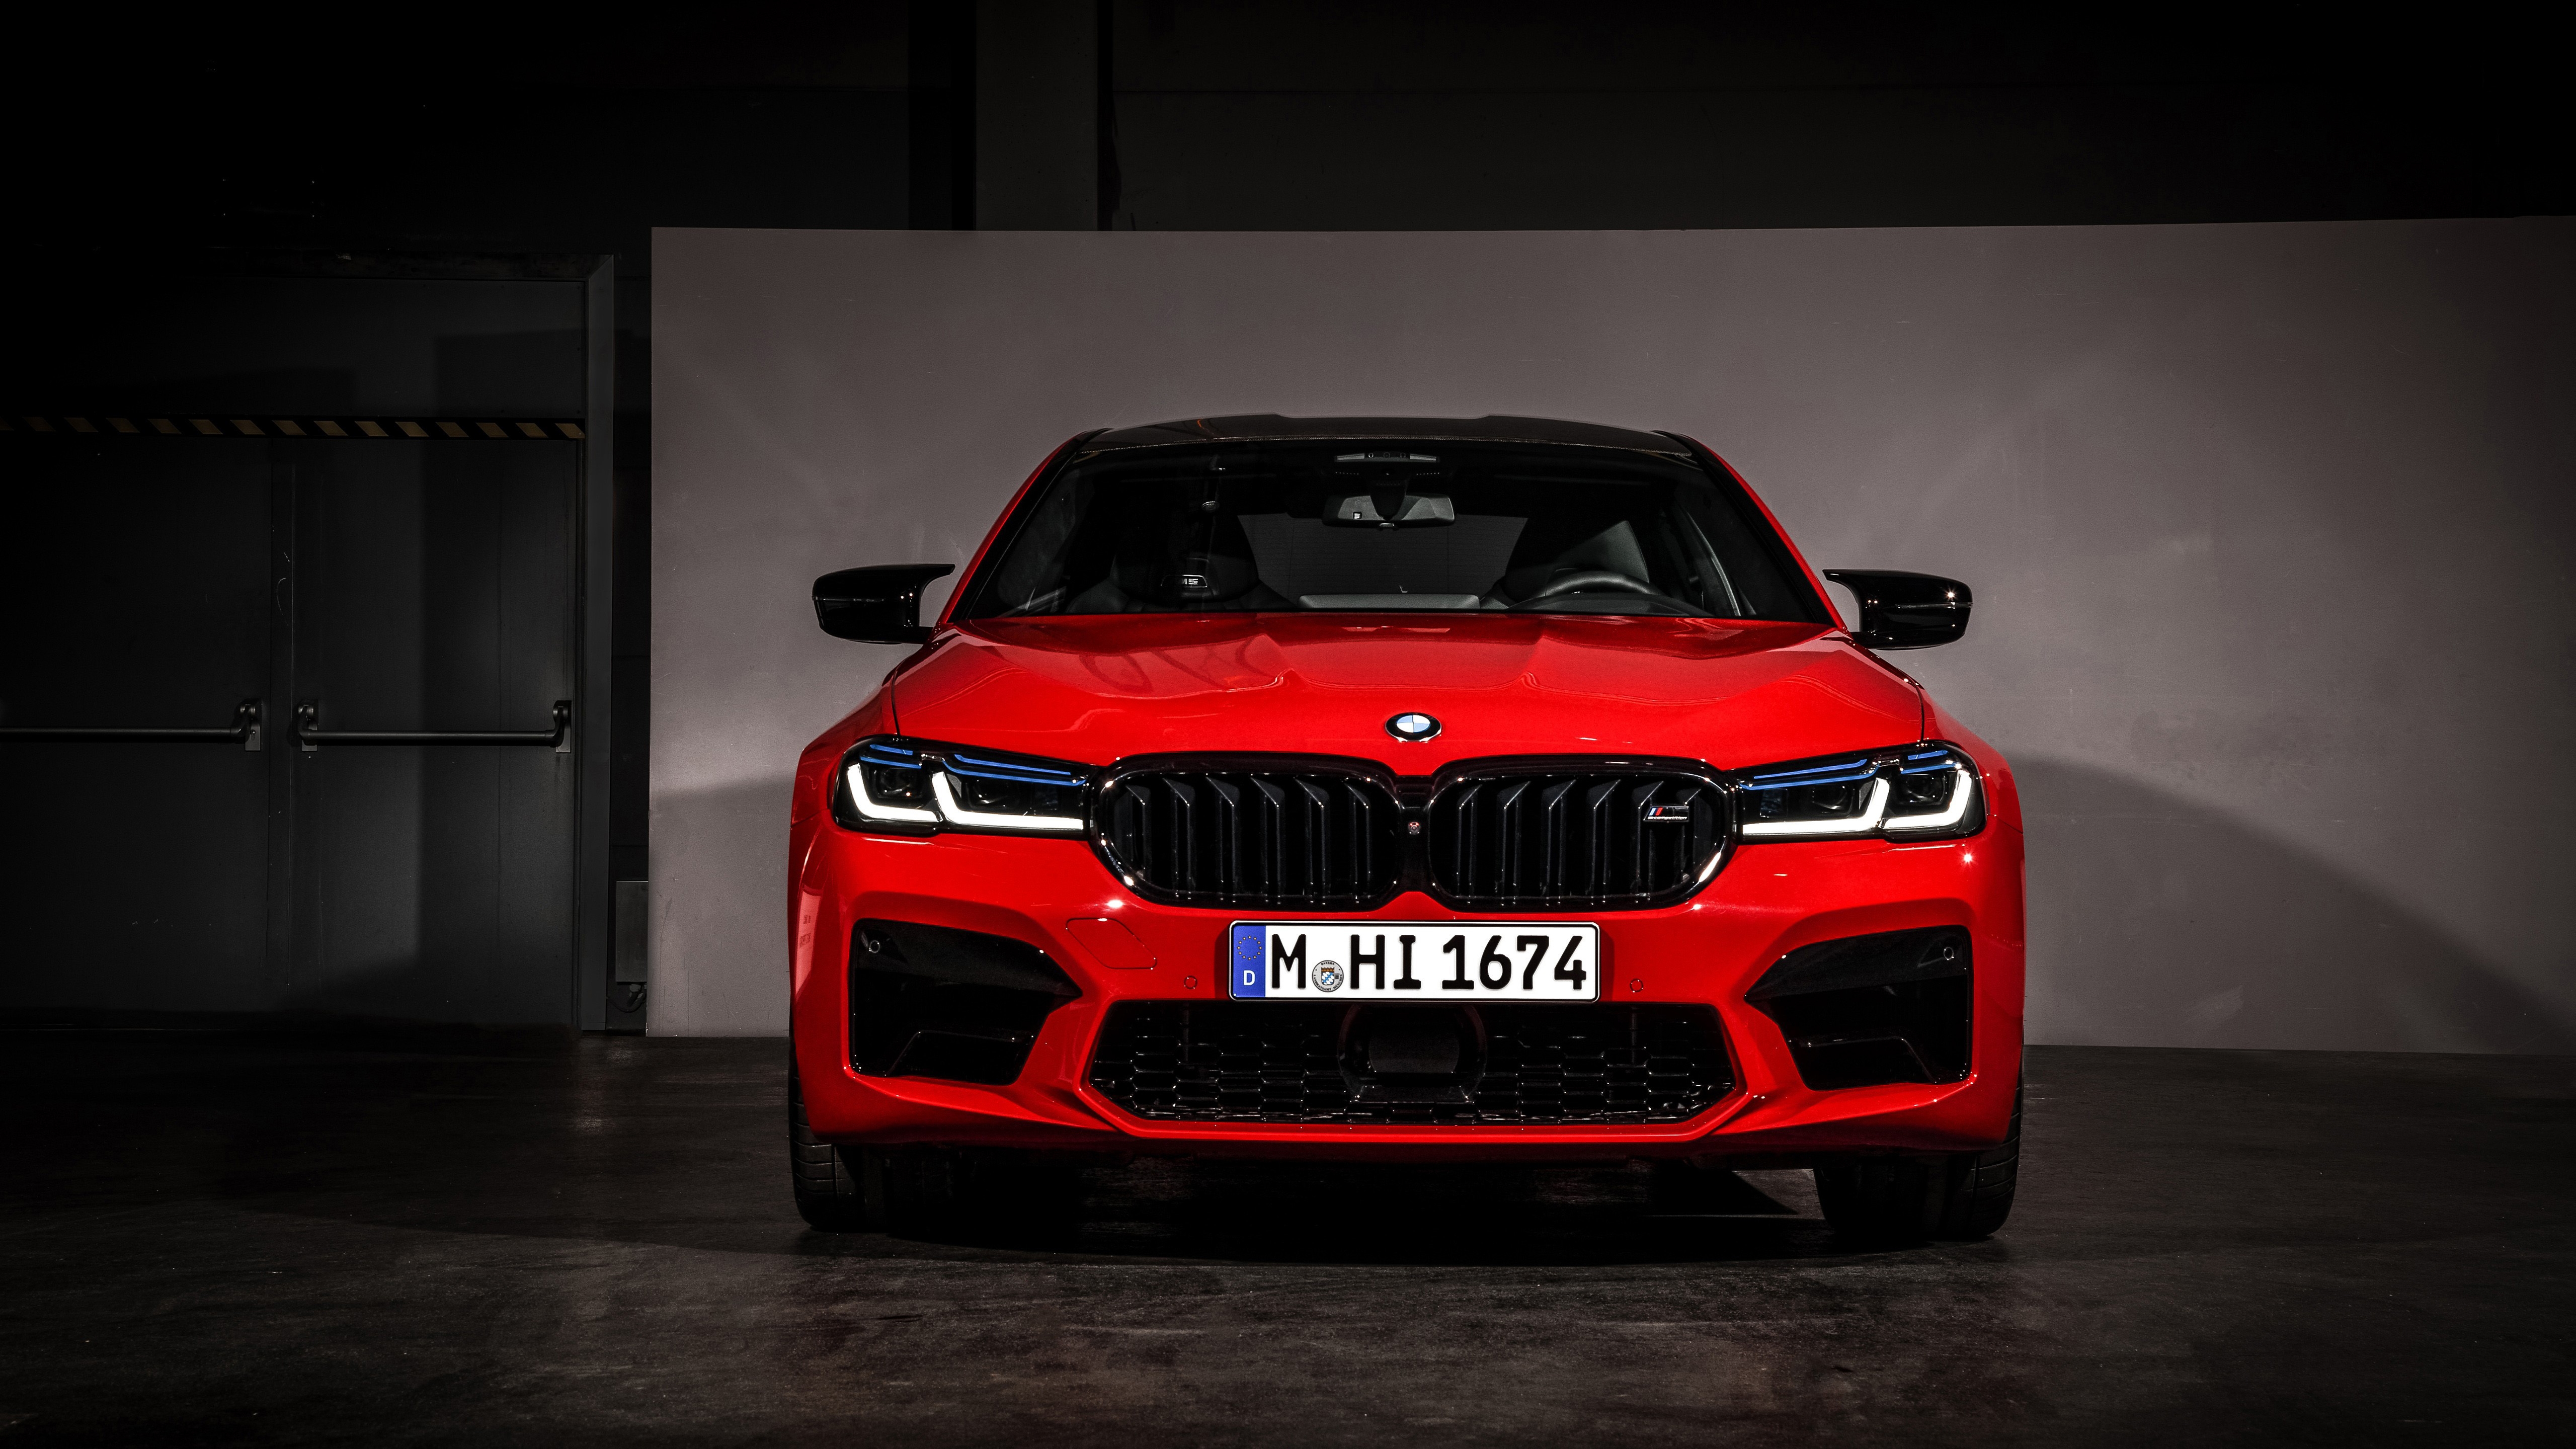 Free photo Bmw m5 in red color